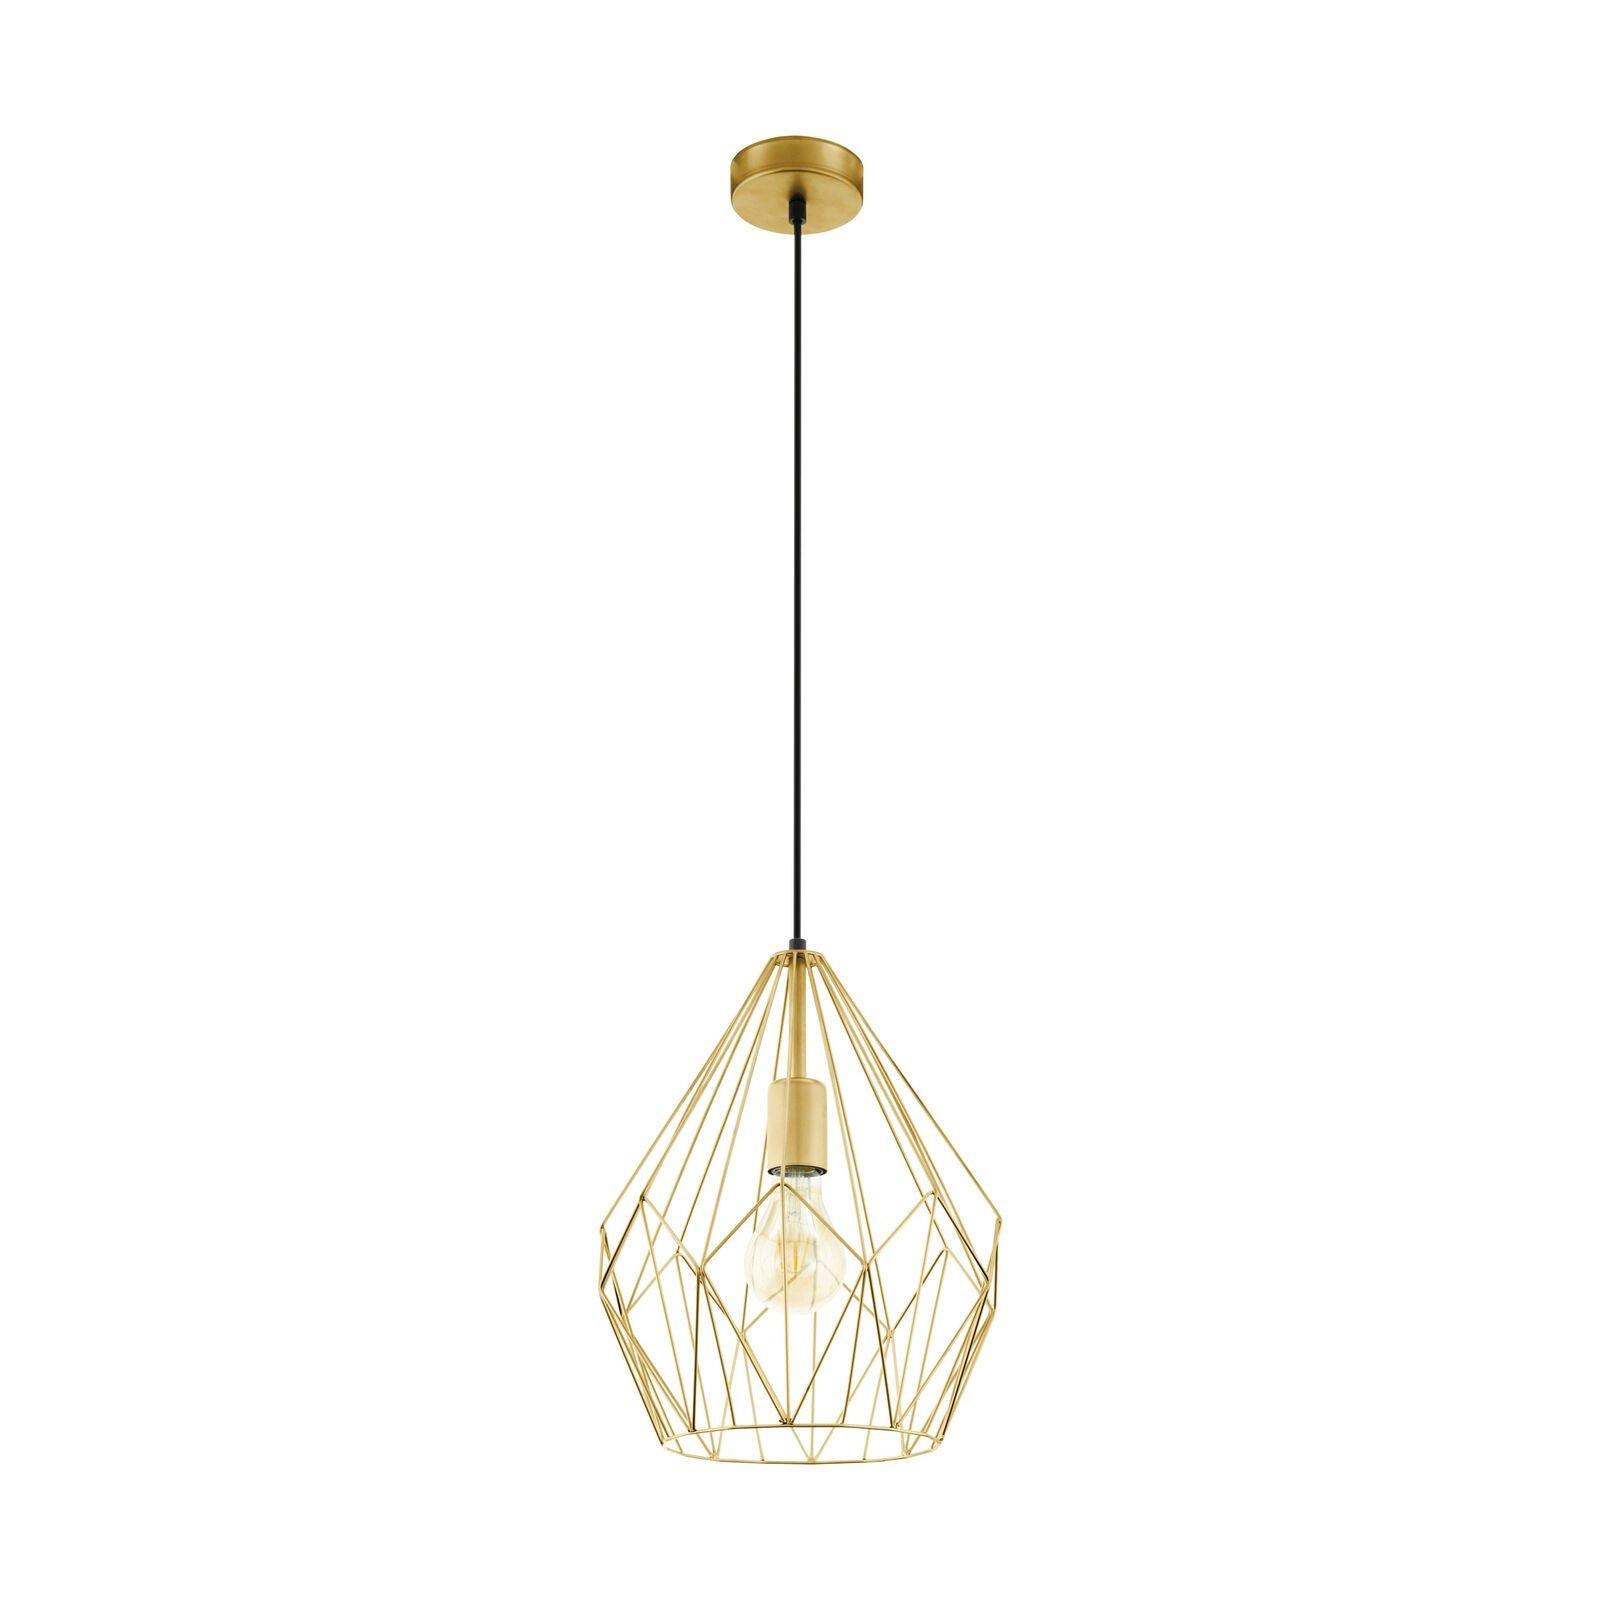 Hanging Ceiling Pendant Light Gold Wire Cage 1x 60W E27 Hallway Feature Lamp